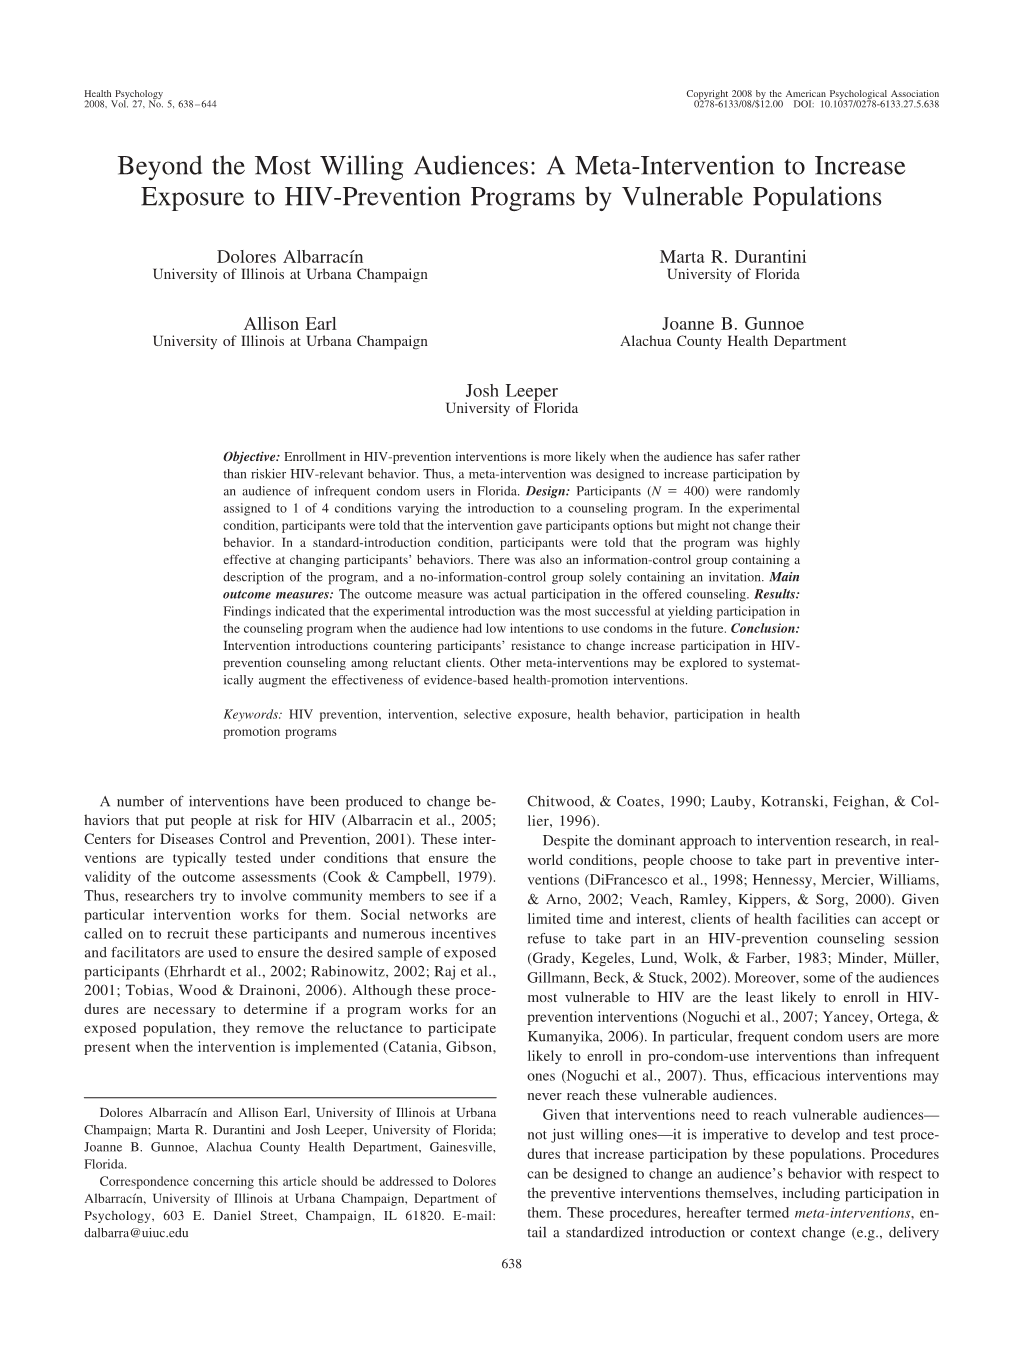 A Meta-Intervention to Increase Exposure to HIV-Prevention Programs by Vulnerable Populations